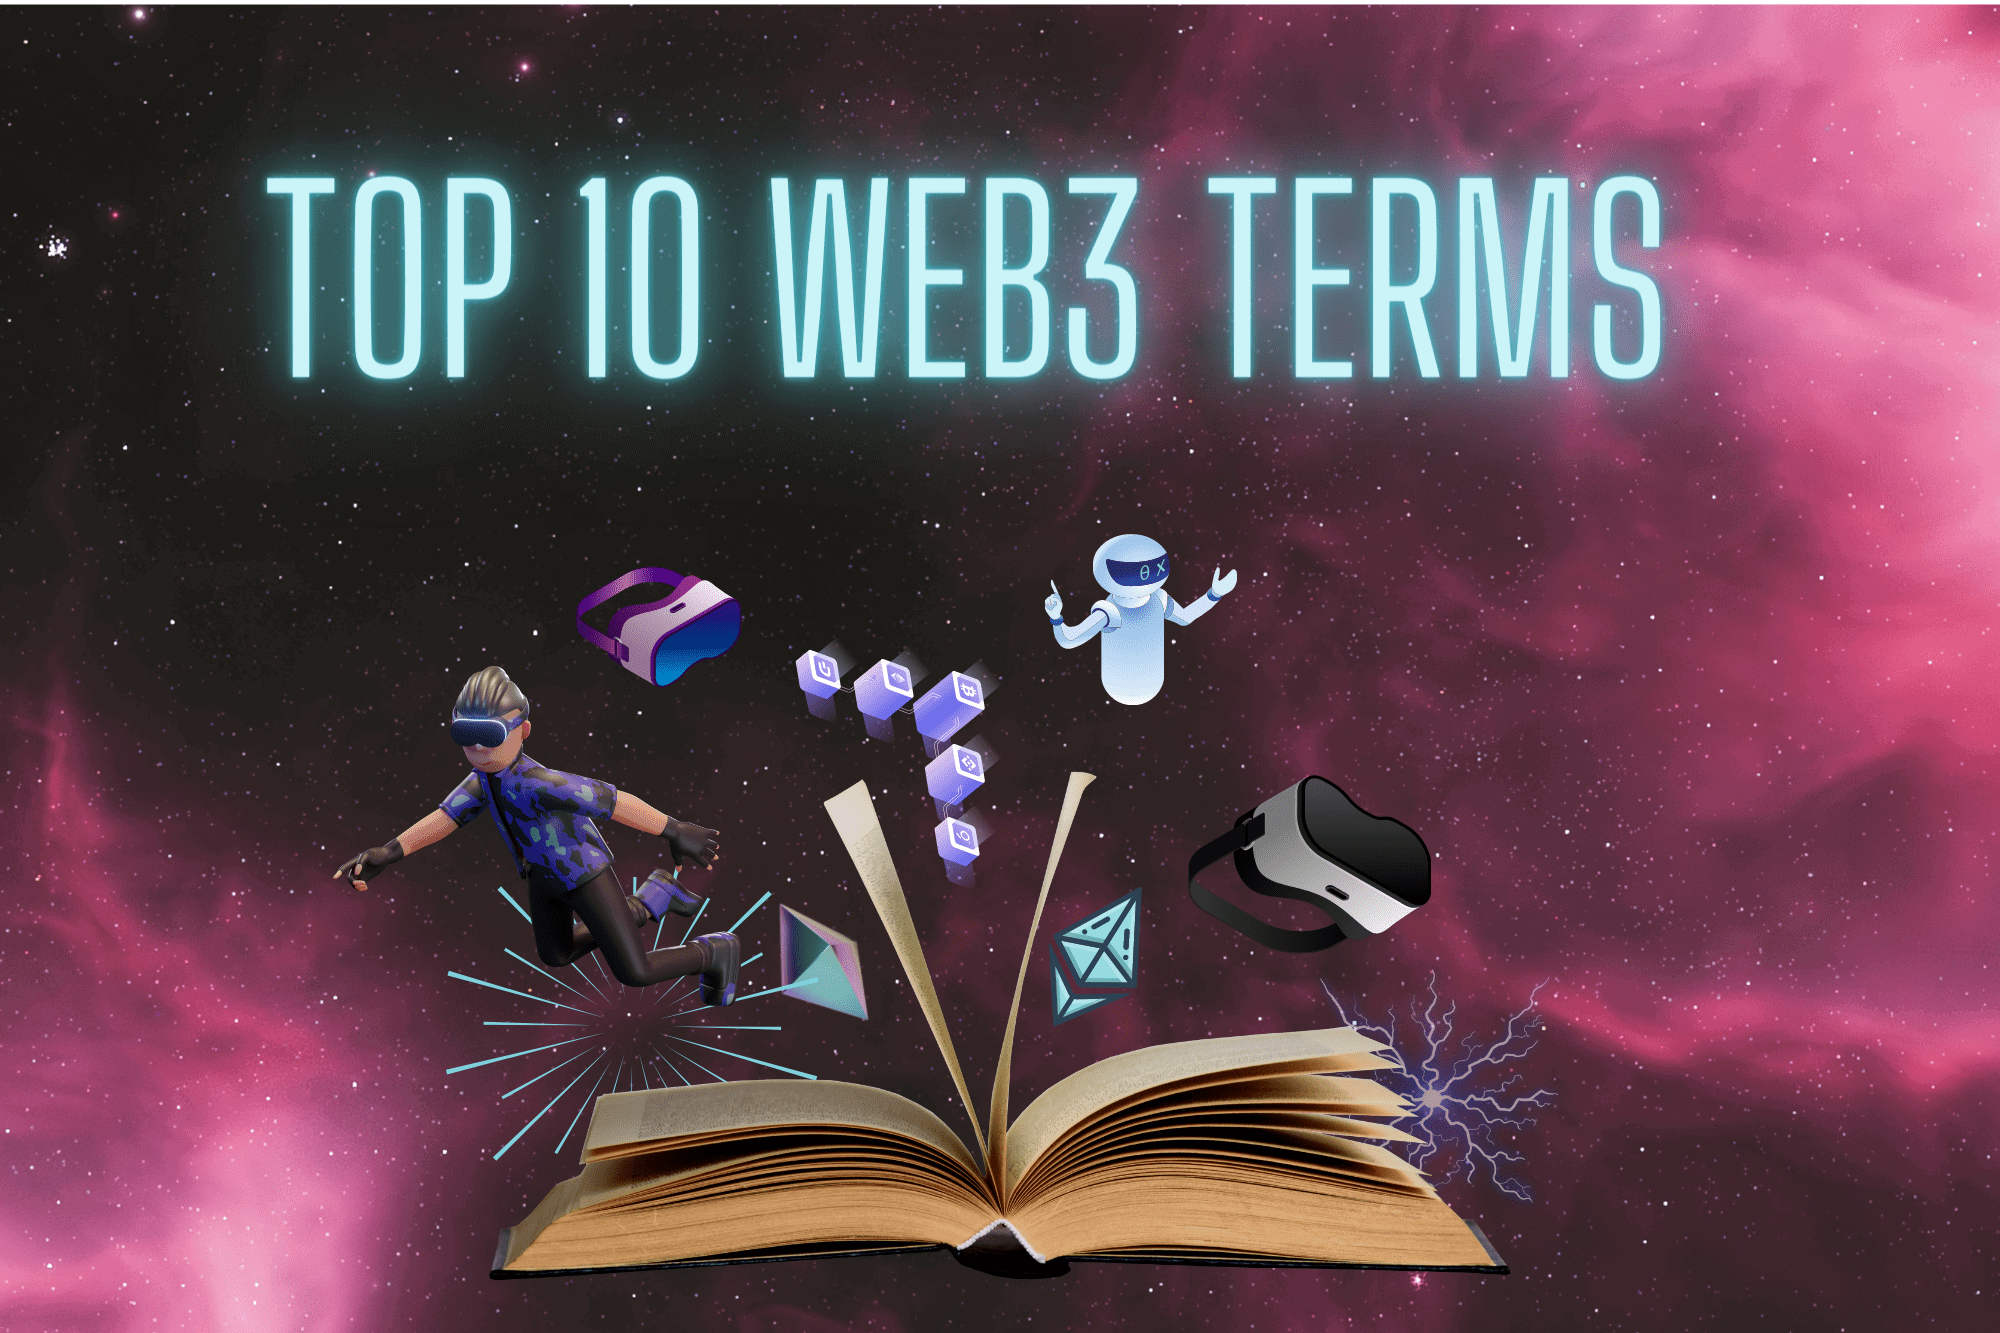 Top 10 Web 3.0 terms you should know